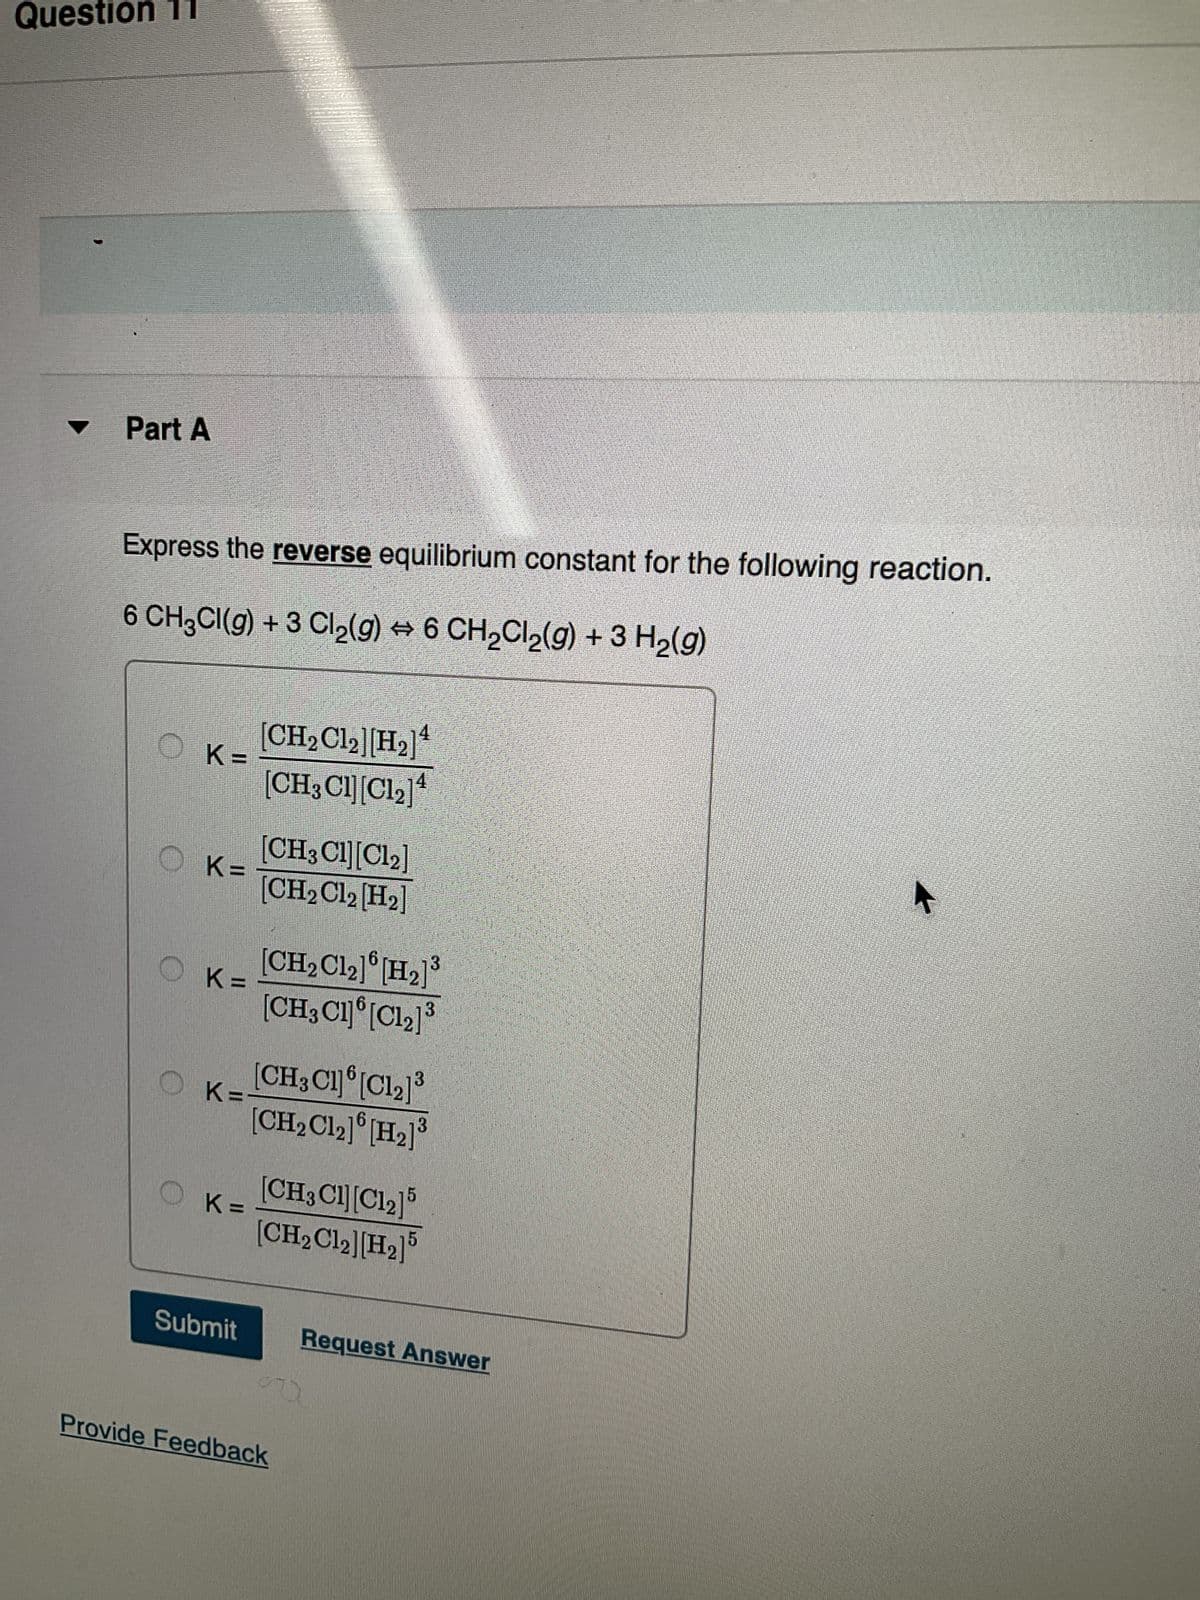 Question
Part A
Express the reverse equilibrium constant for the following reaction.
6 CH²Cl(g) + 3 Cl₂(g) ↔ 6 CH₂Cl₂(g) + 3 H₂(g)
O K=
K=
OK=
OK=-
OK=
Submit
25
[CH₂Cl2][H₂]¹
[CH3 Cl][C1₂] ¹
[CH3 C1][Cl₂]
[CH₂Cl2 [H₂]
[CH₂ C1₂] [H₂]³
[CH3C1][C12]3
[CH3Cl][C12]3
[CH₂ C12] [H₂]³
[CH3Cl][C12]5
[CH₂Cl2][H₂]
Provide Feedback
Request Answer
4